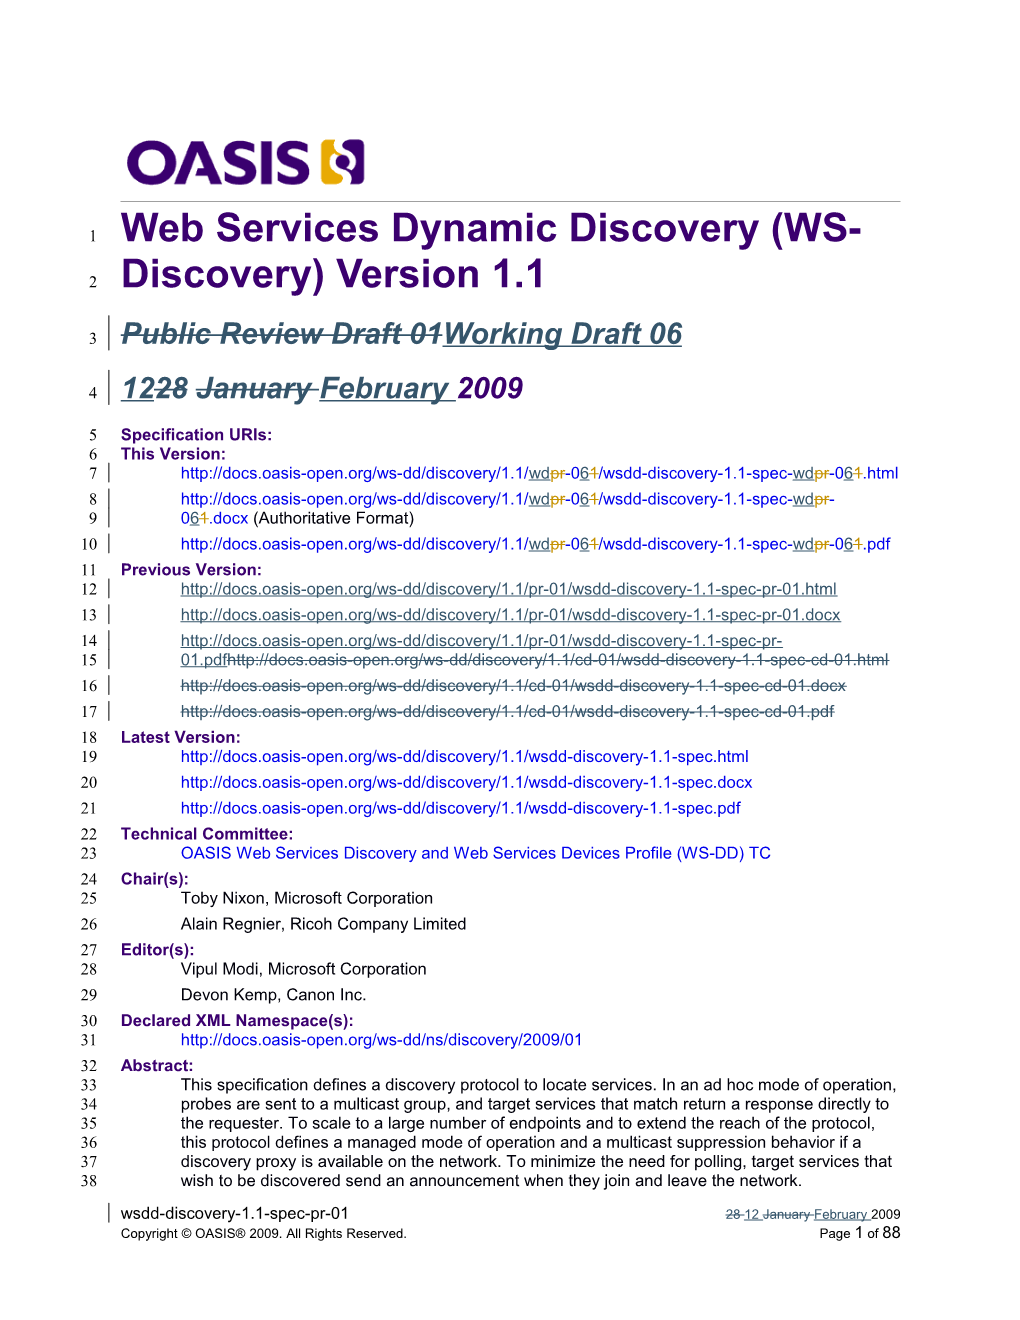 OASIS Web Services Dynamic Discovery (WS-Discovery) Version 1.1